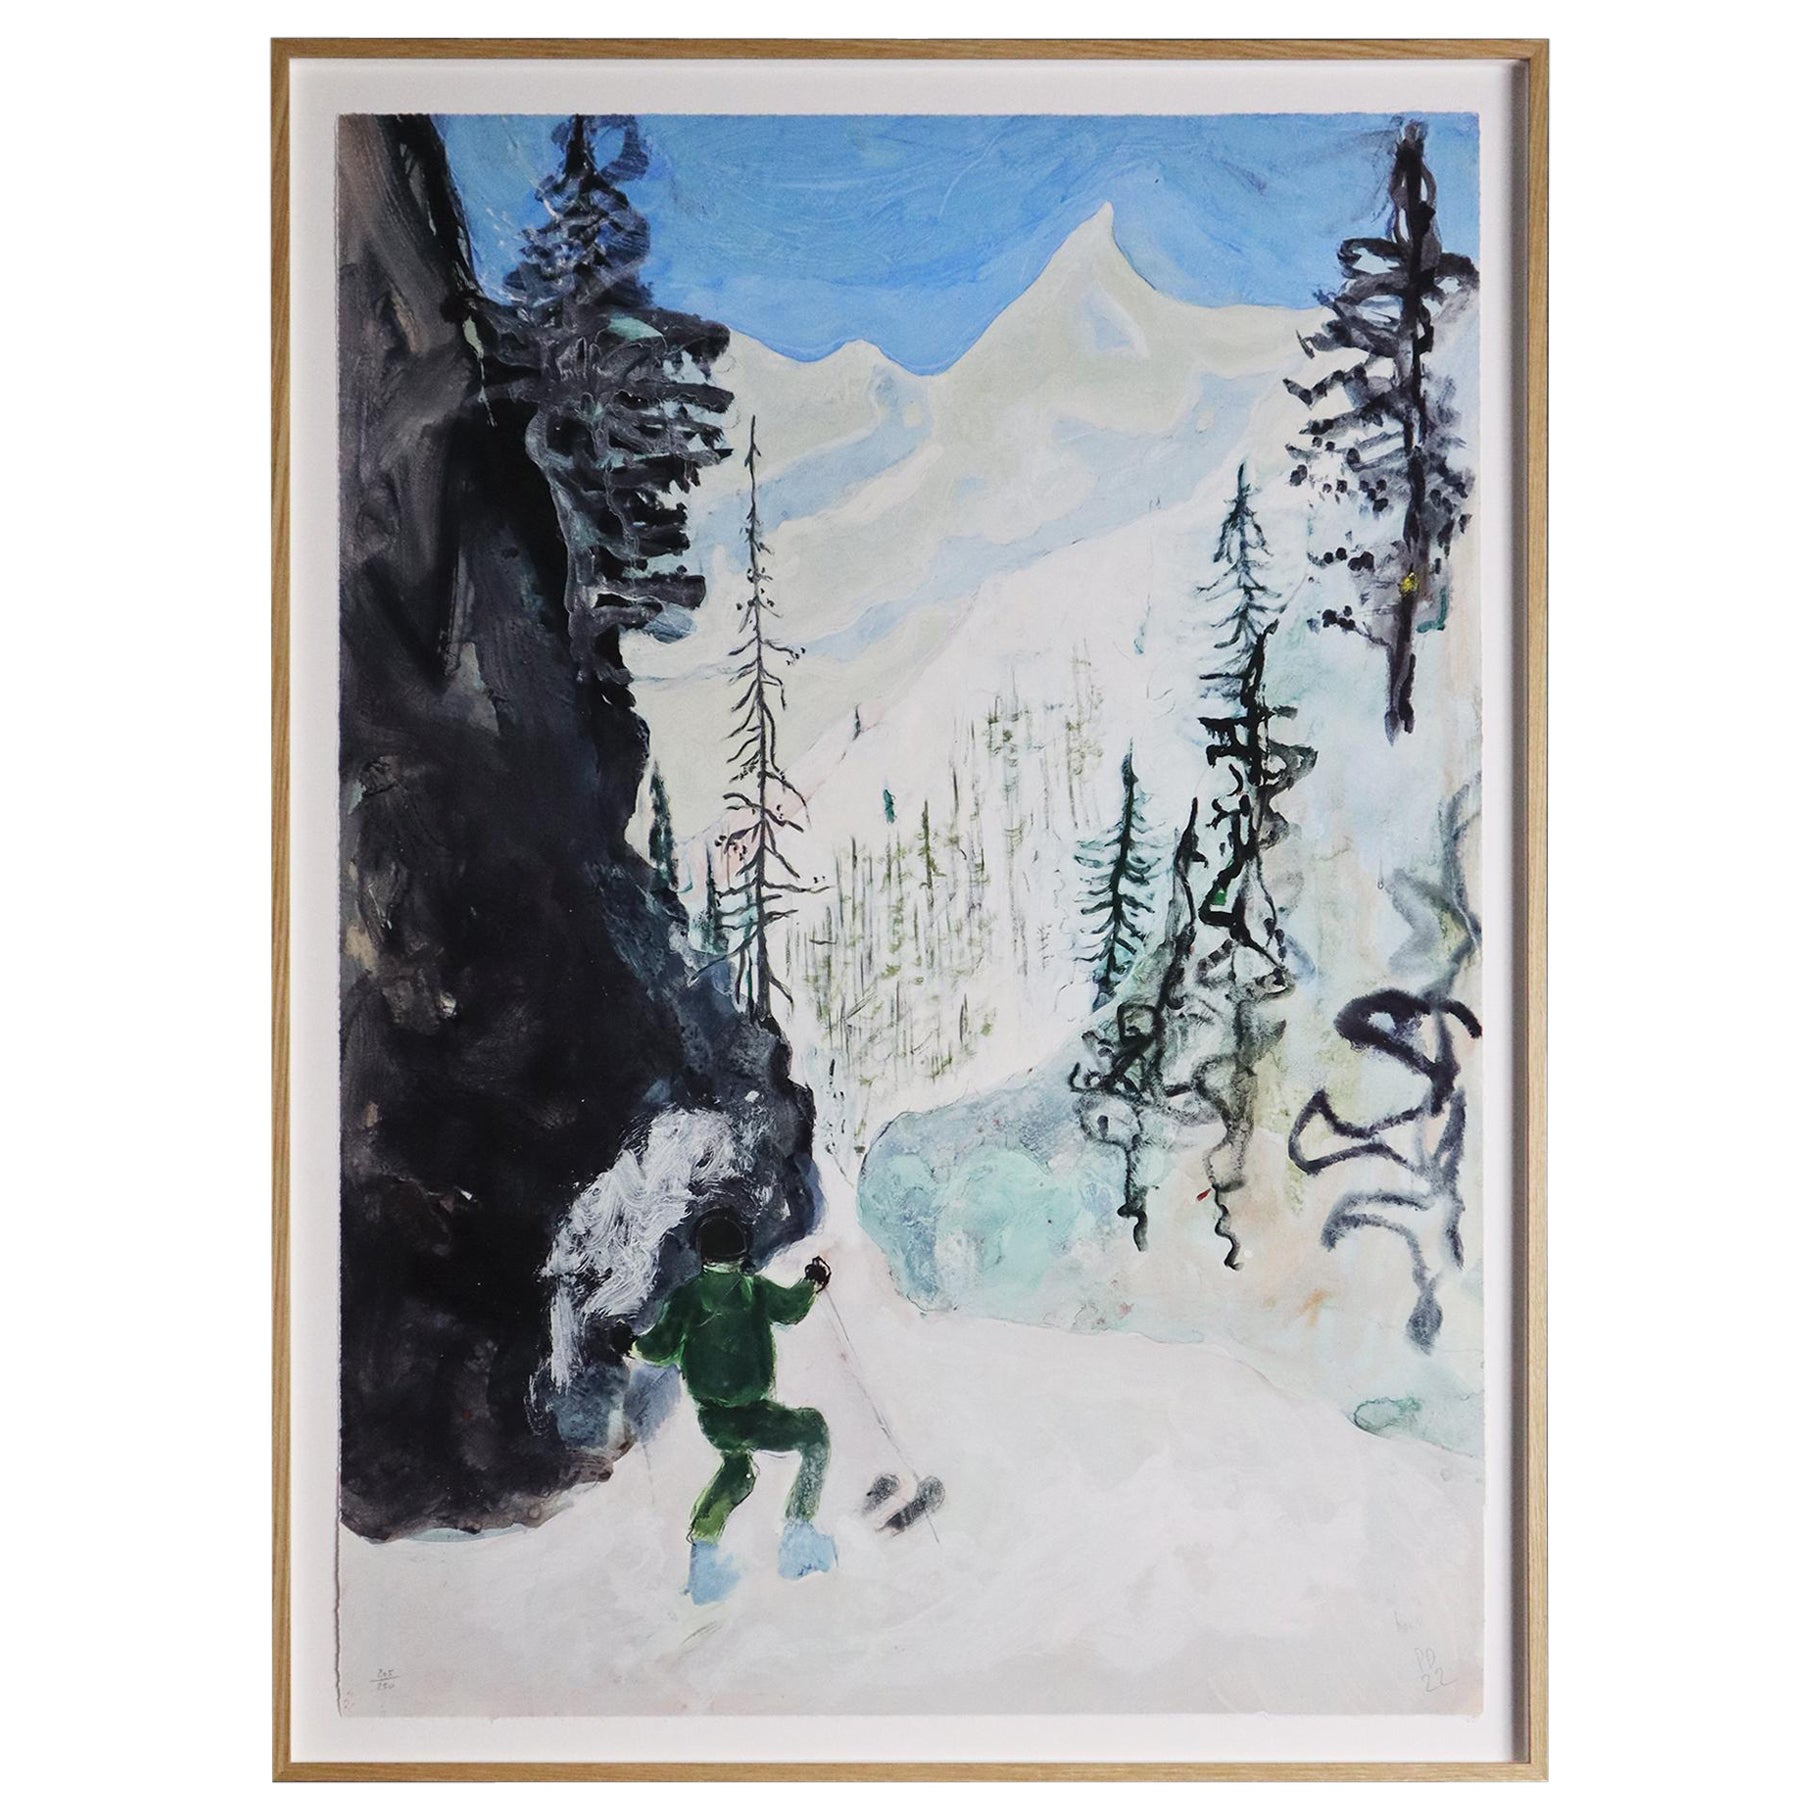 Peter Doig 
D1-1 Couloir 1, 2022
114 x 80 cm
Edition Size 250 + 25 APs, each numbered and hand signed
Giclée Print on Cotton Smooth Rag
Oak frame with Optium Tru Vue Acrylic Glass
In mint condition 

PLEASE NOTE: Images of edition number are example